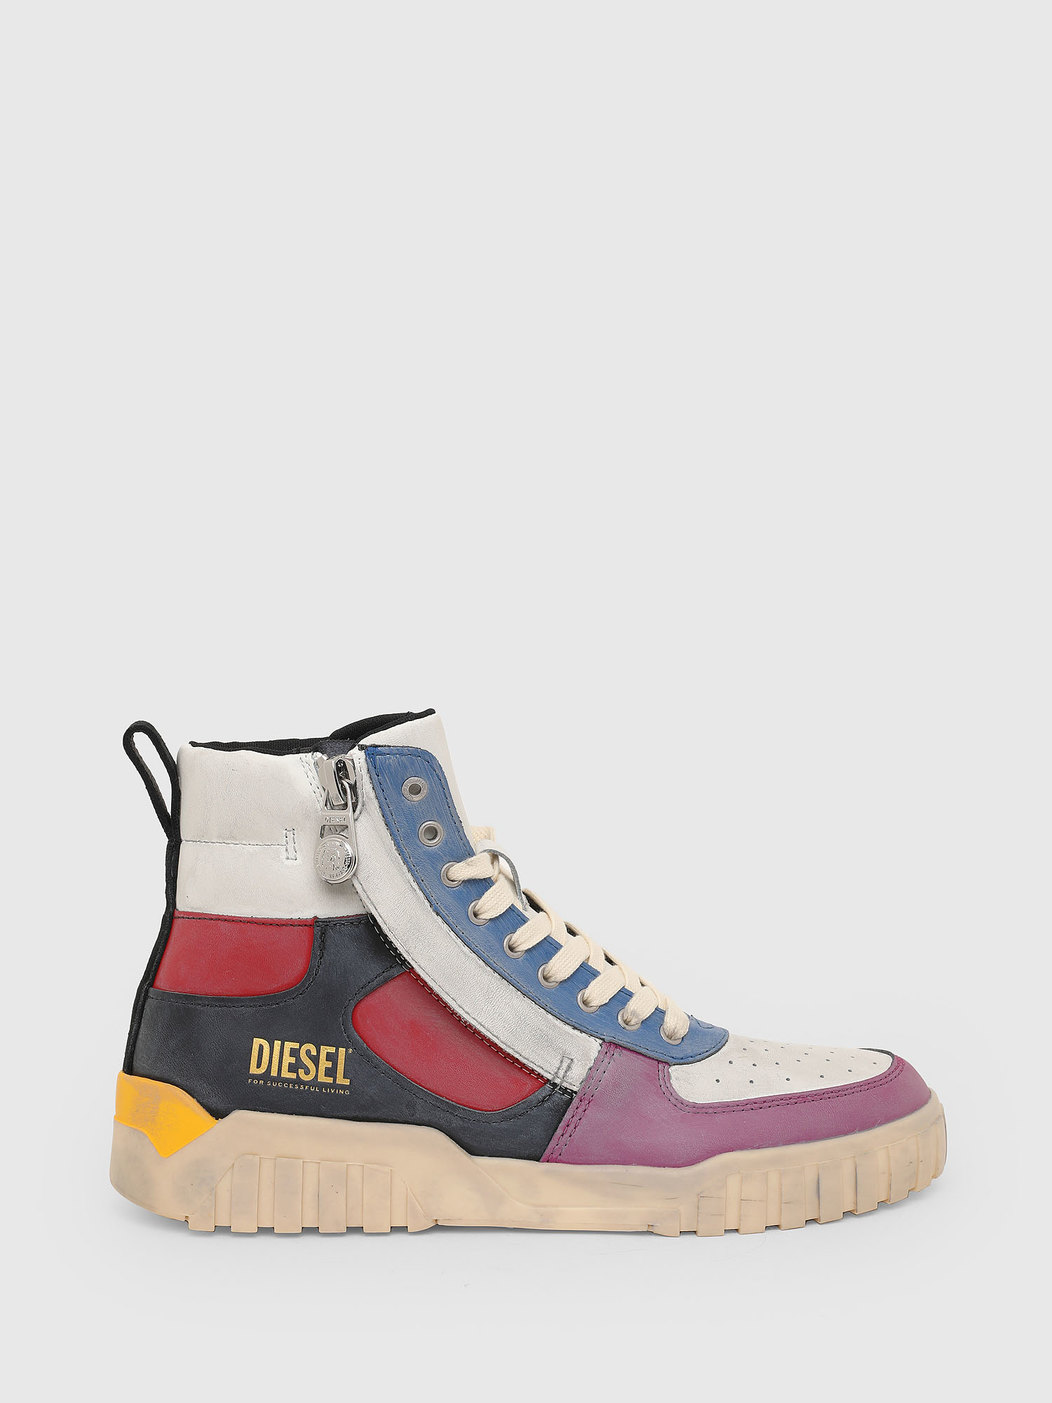 High-top sneakers in treated leather